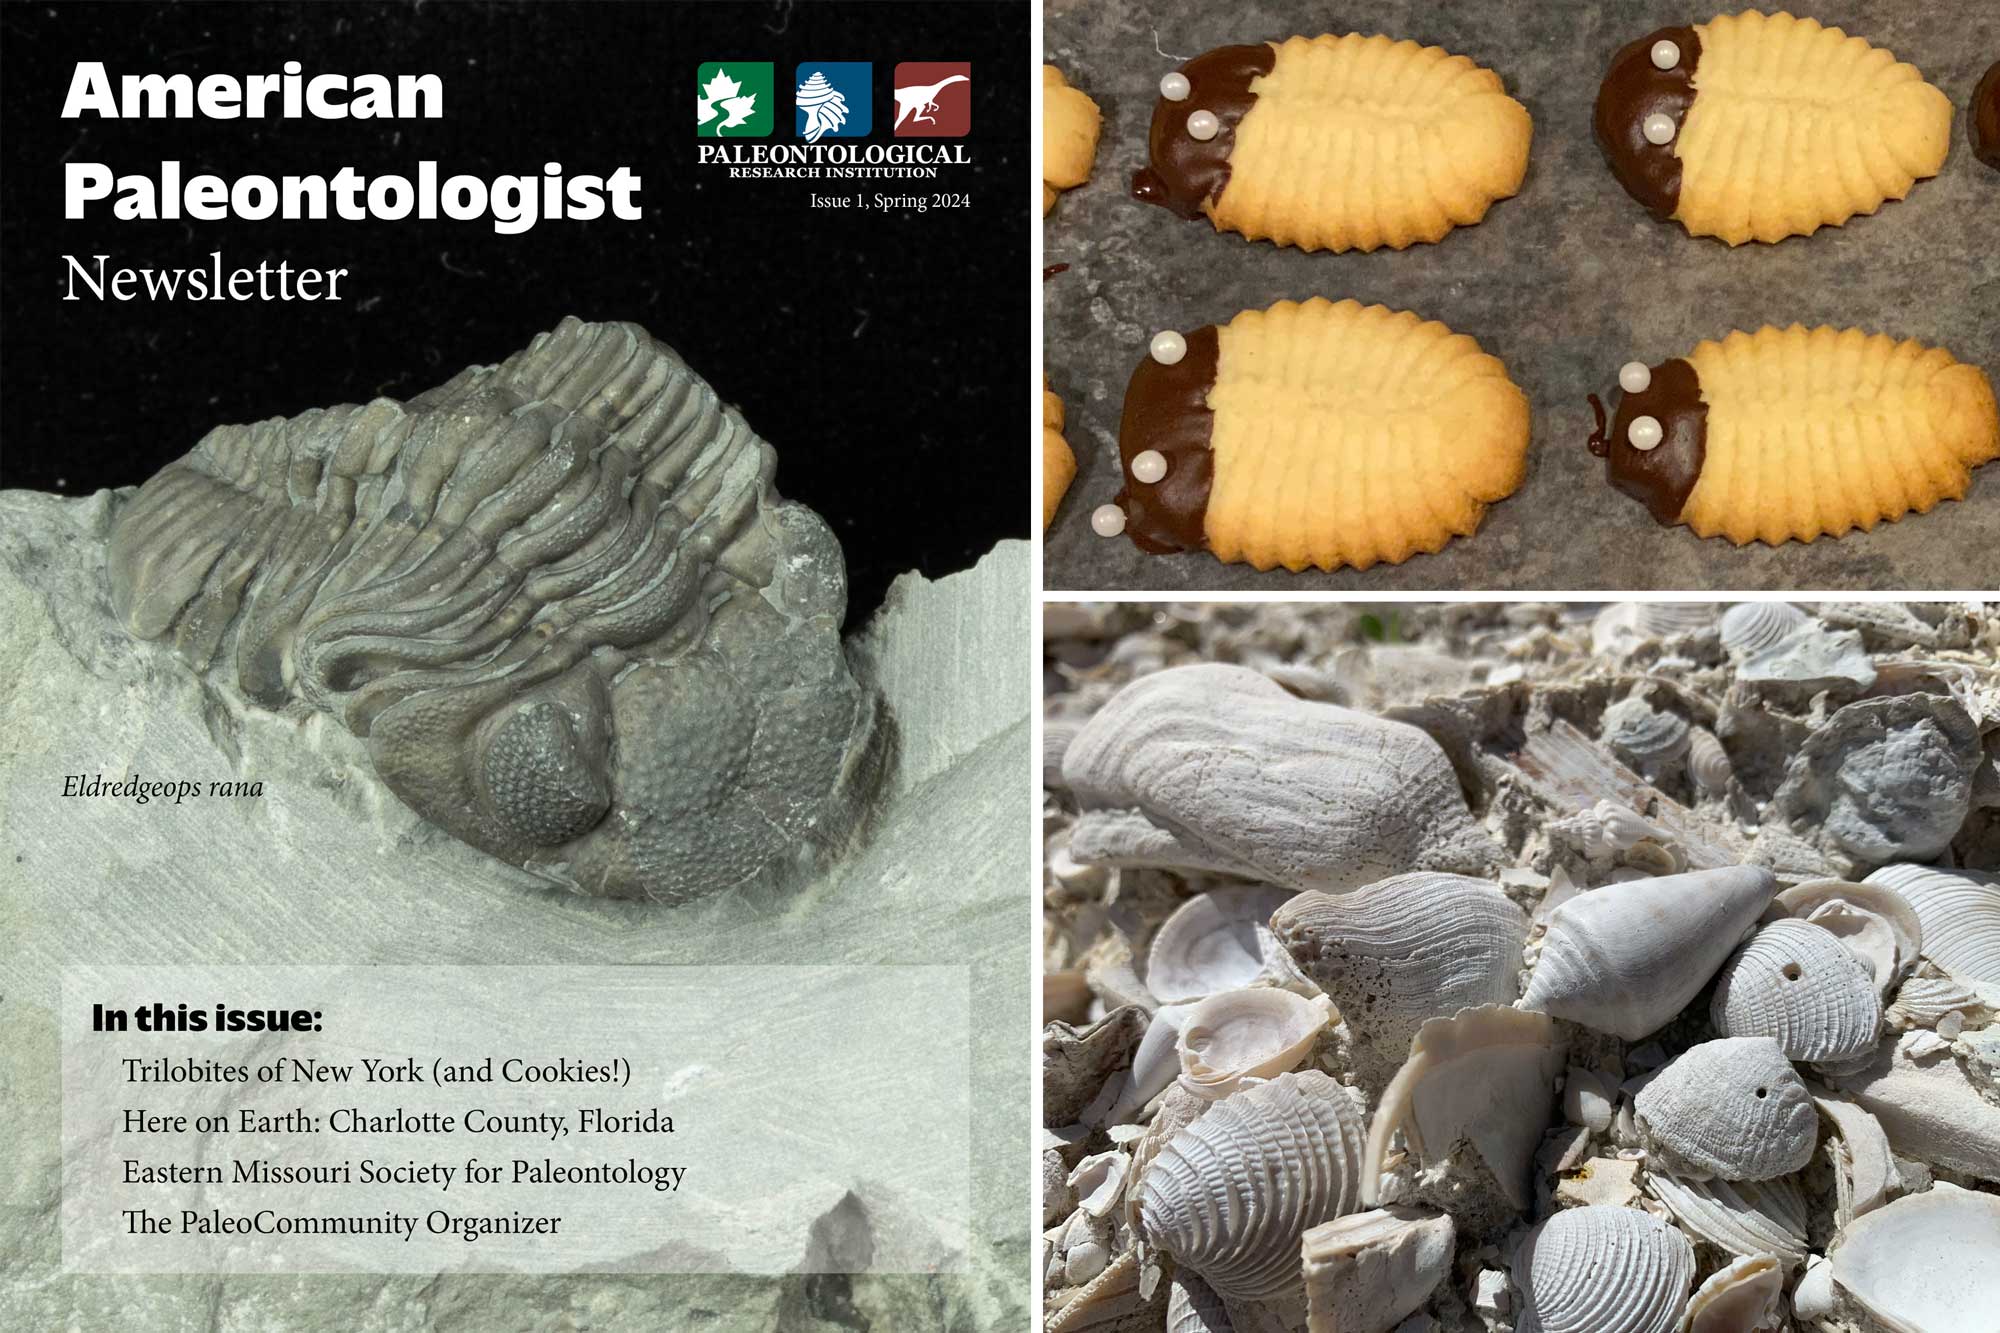 Image shows a the cover of issue 1 of the American Paleontologist Newsletter, trilobite cookies, and fossil shells from Florida.